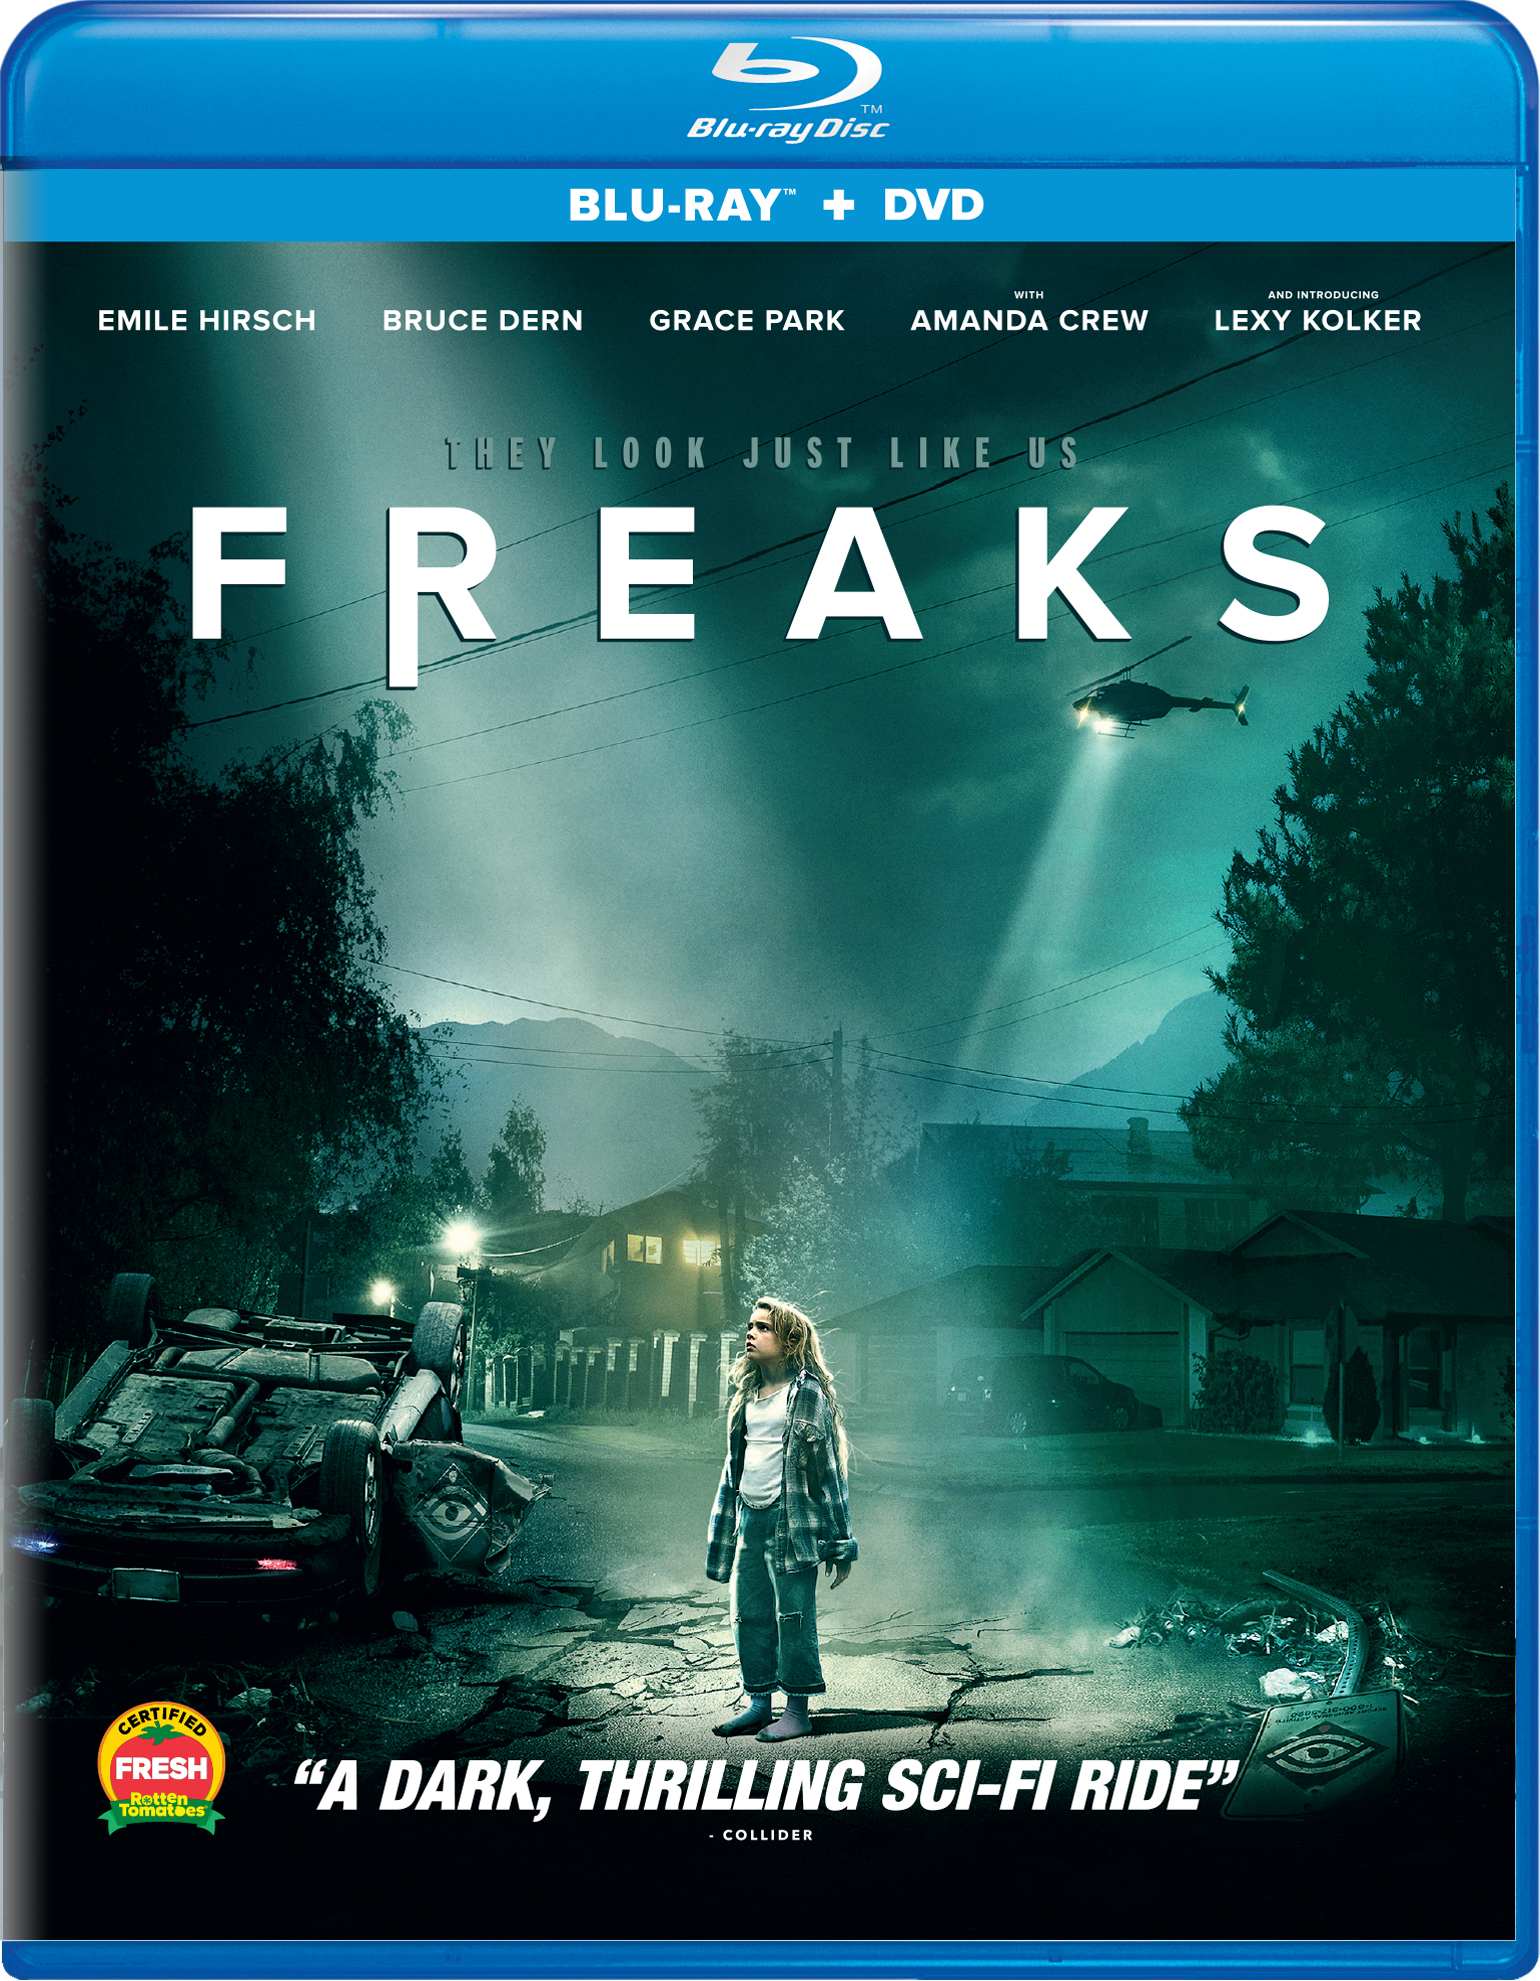 Freaks (with DVD) - Blu-ray [ 2019 ]  - Sci Fi Movies On Blu-ray - Movies On GRUV